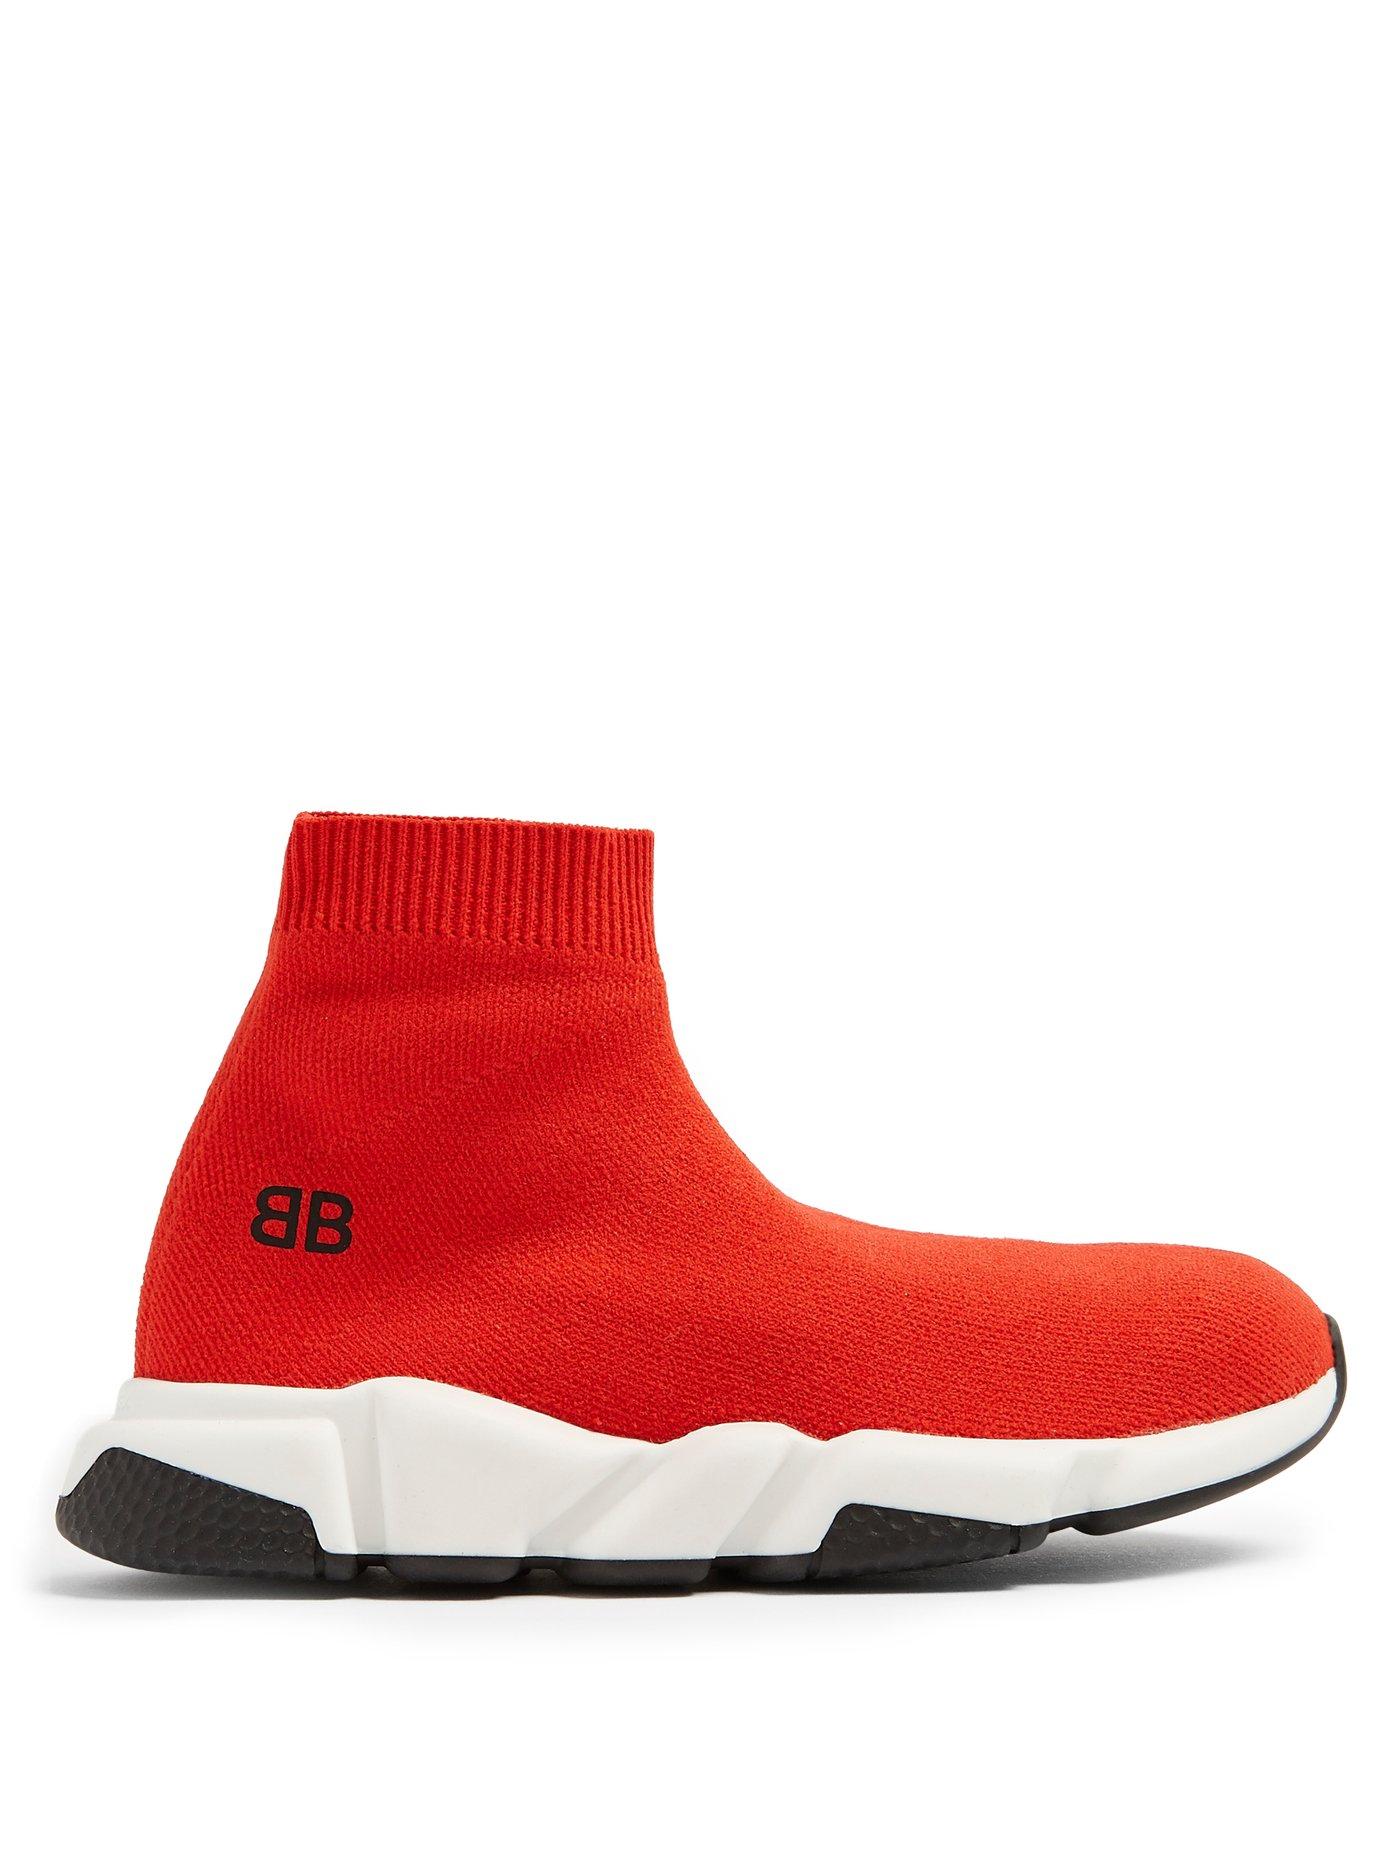 Balenciaga's Kids Shoes Are Here And They $295